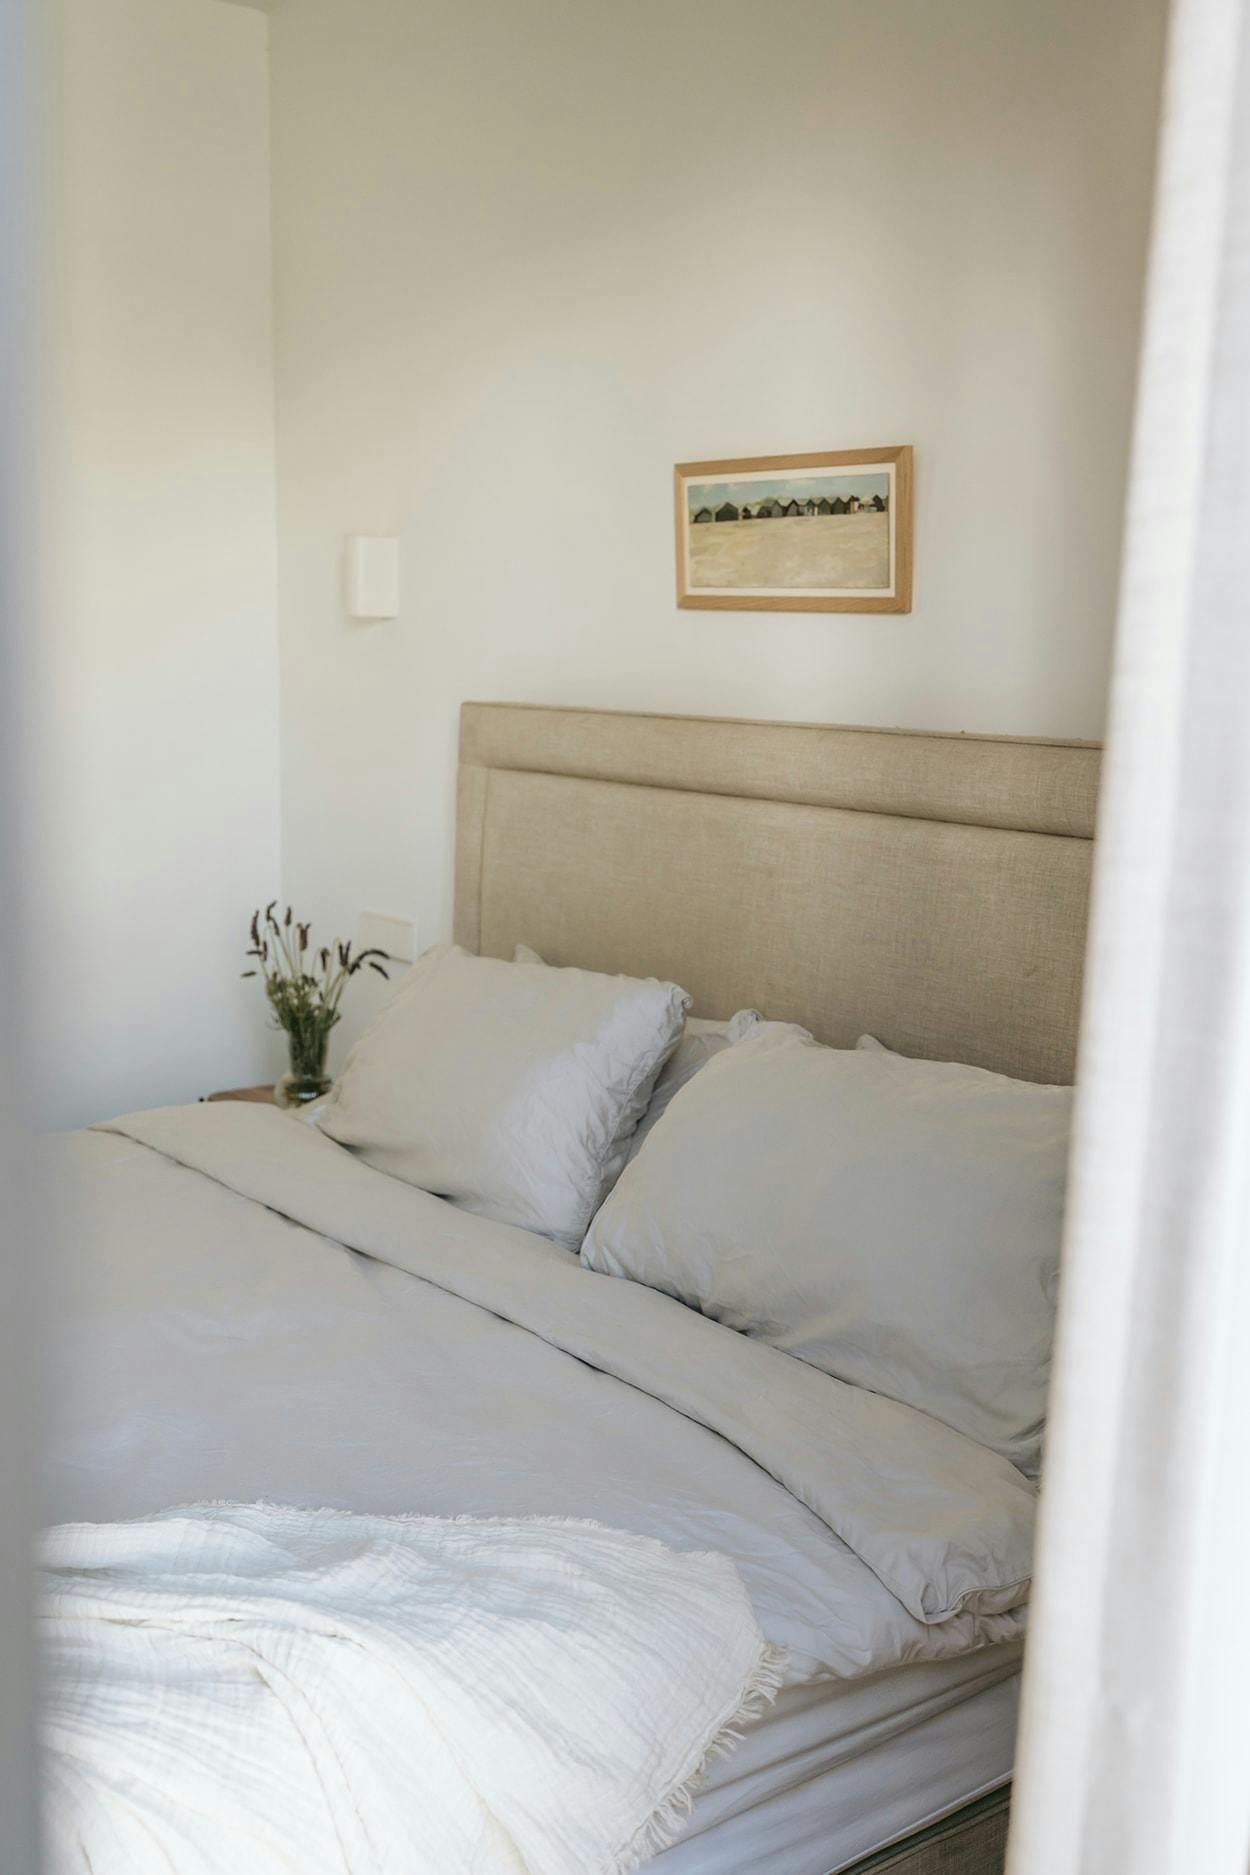 The image features a neatly made bed with a white comforter and pillows, placed in a room with a window.